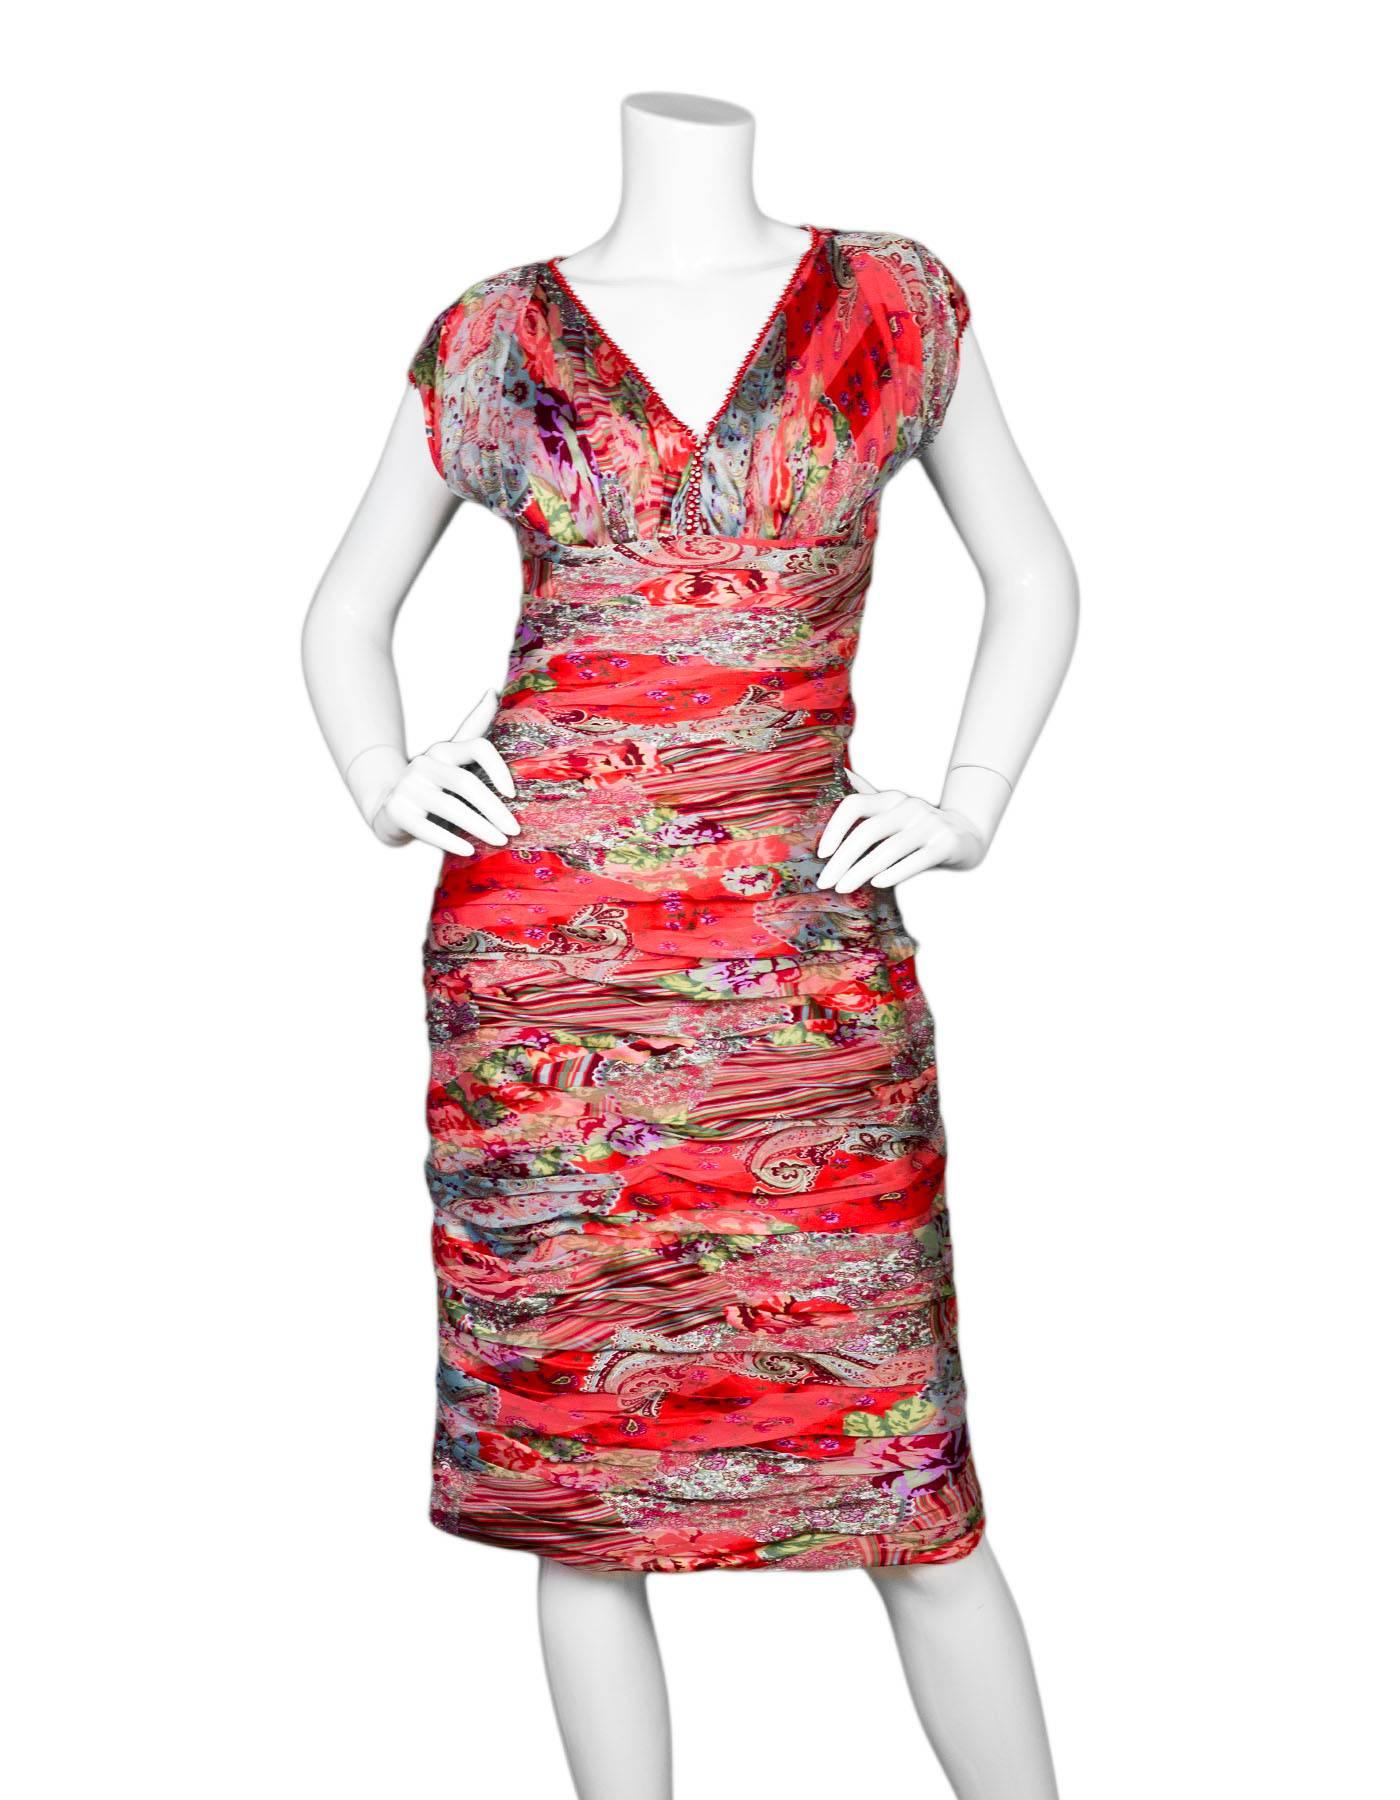 Naeem Kahn Coral Red Silk Floral Dress Sz 12

Features beaded trim and floral paisley print throughout

Made In: USA
Color: Coral red
Composition: 100% Silk
Closure/Opening: Back zip closure
Overall Condition: Excellent pre-owned condition with the